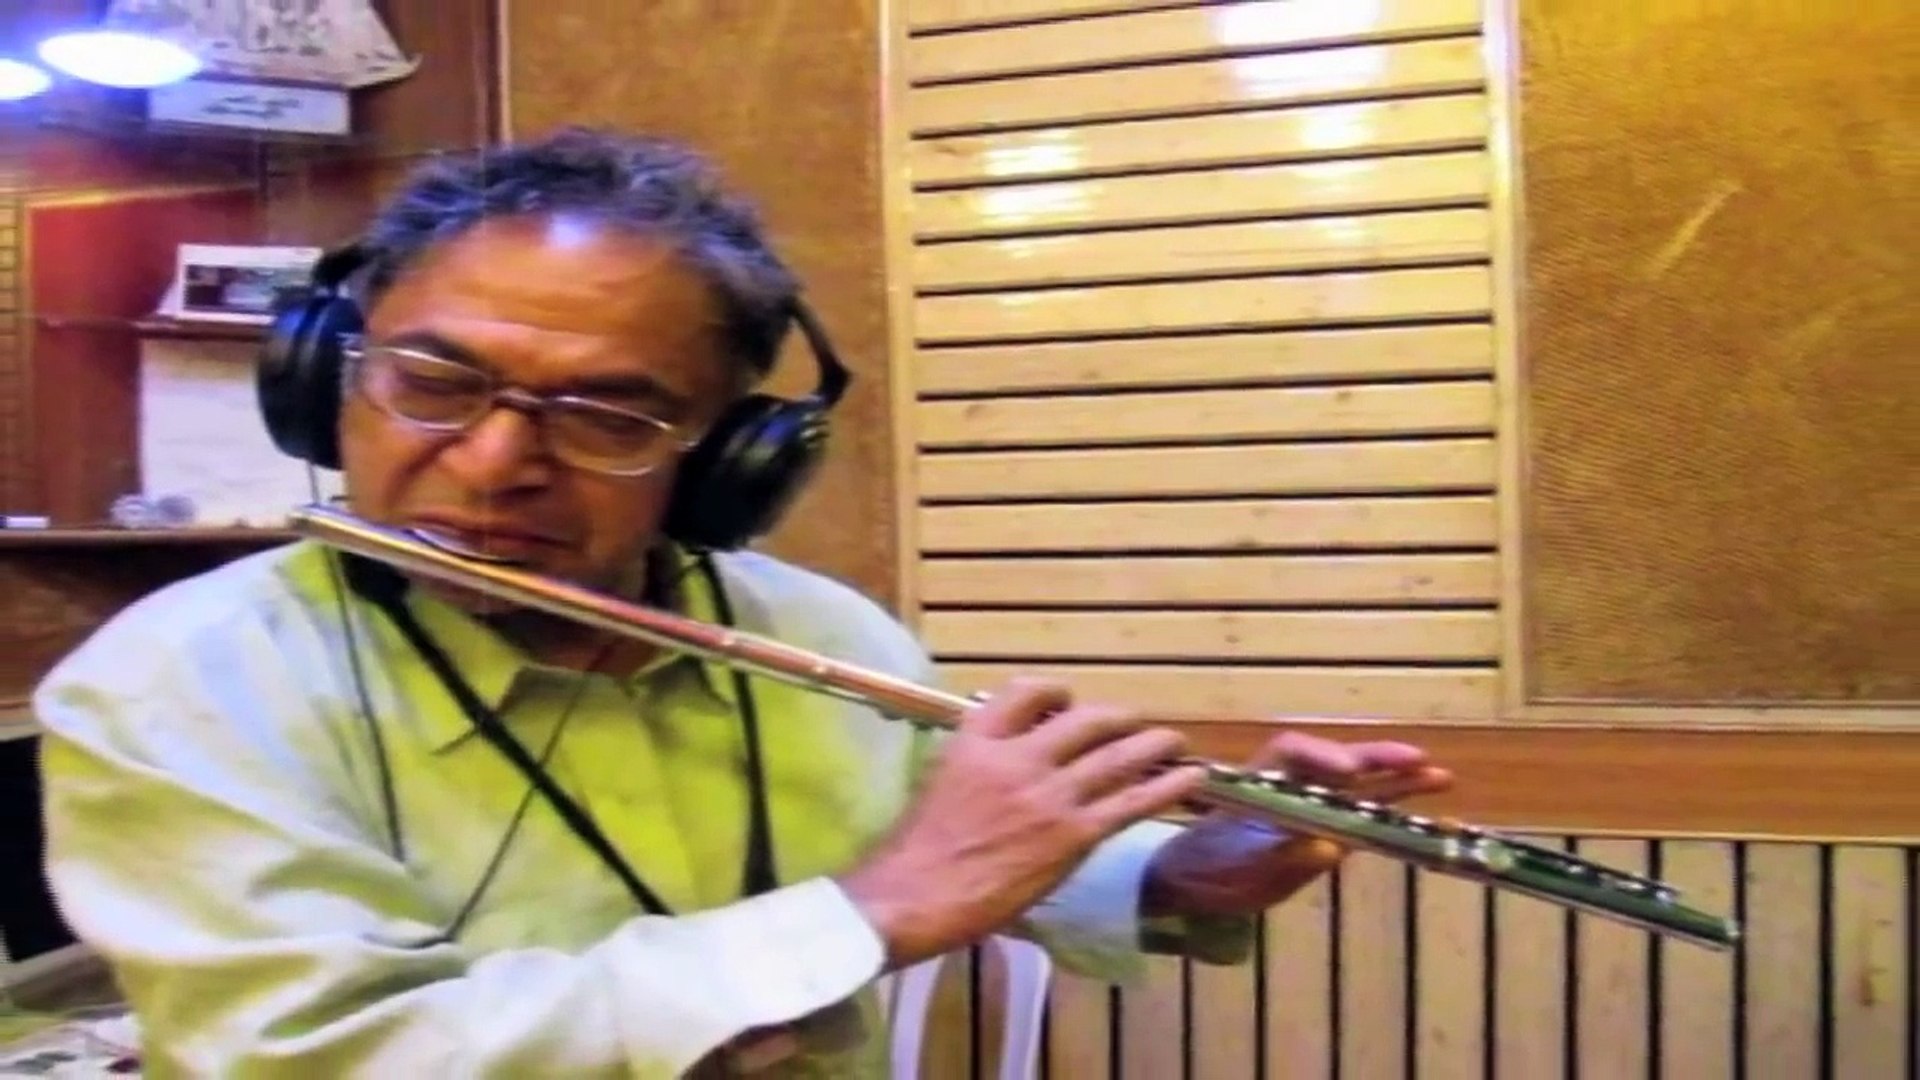 Hindi Instrumental Flute most indian popular full songs hits bollywood music  video new youtube album - video Dailymotion